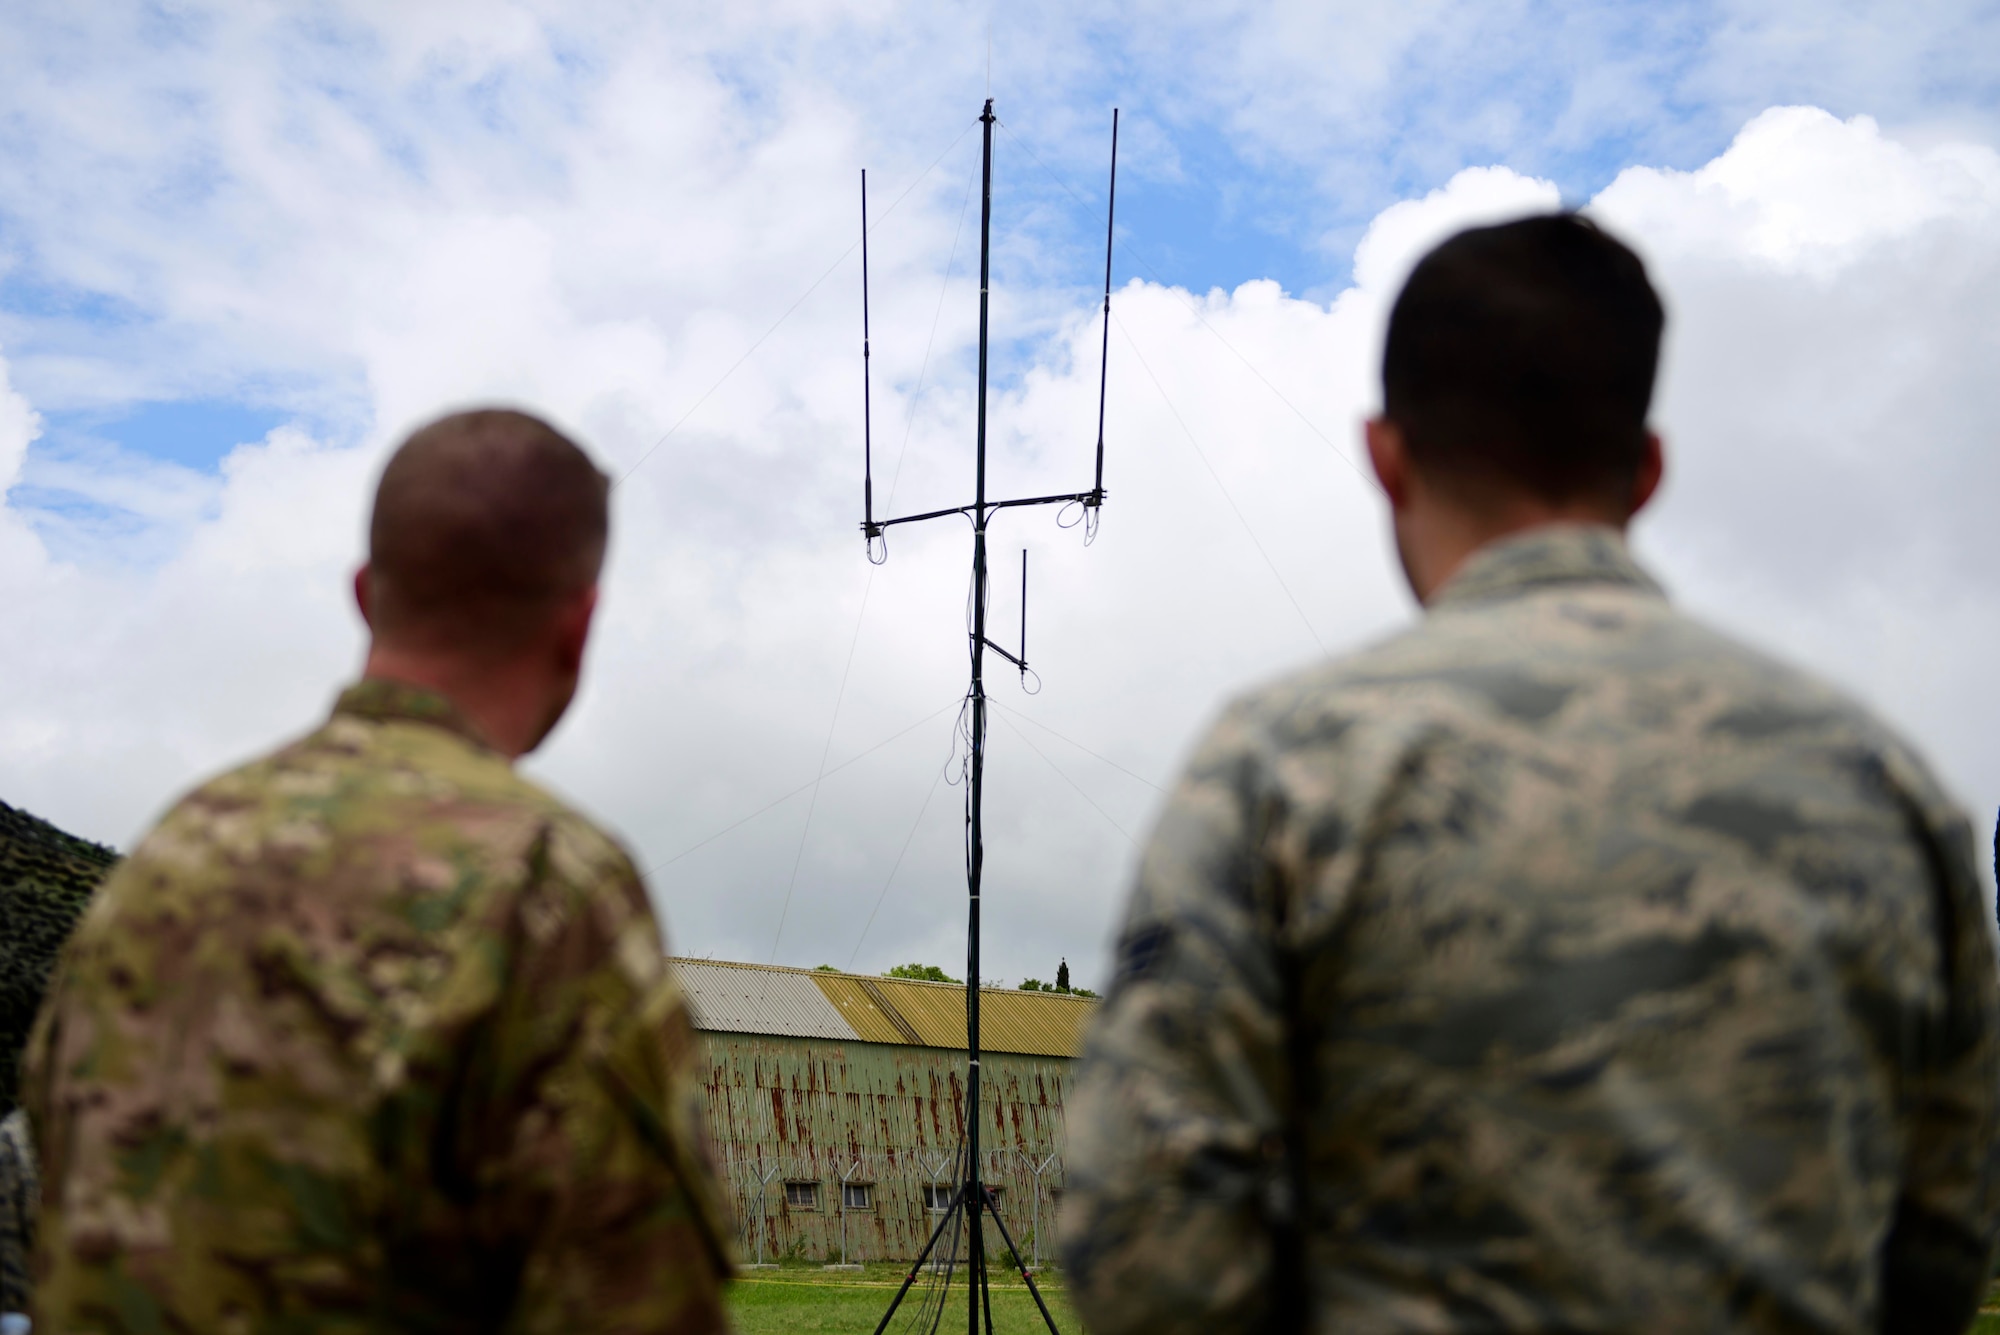 SrA Judah Wine, 606th Air Control Squadron radio frequency systems technician, explains blue sky mast set up and operations to Lt. Col. Brian Robertson, 606th ACS commander, at Pula Airport, Croatia, May 28, 2019. The 606th ACS deployed in support of exercise Astral Knight 2019. (U.S. Air Force photo by Staff Sgt. Tory Cusimano)